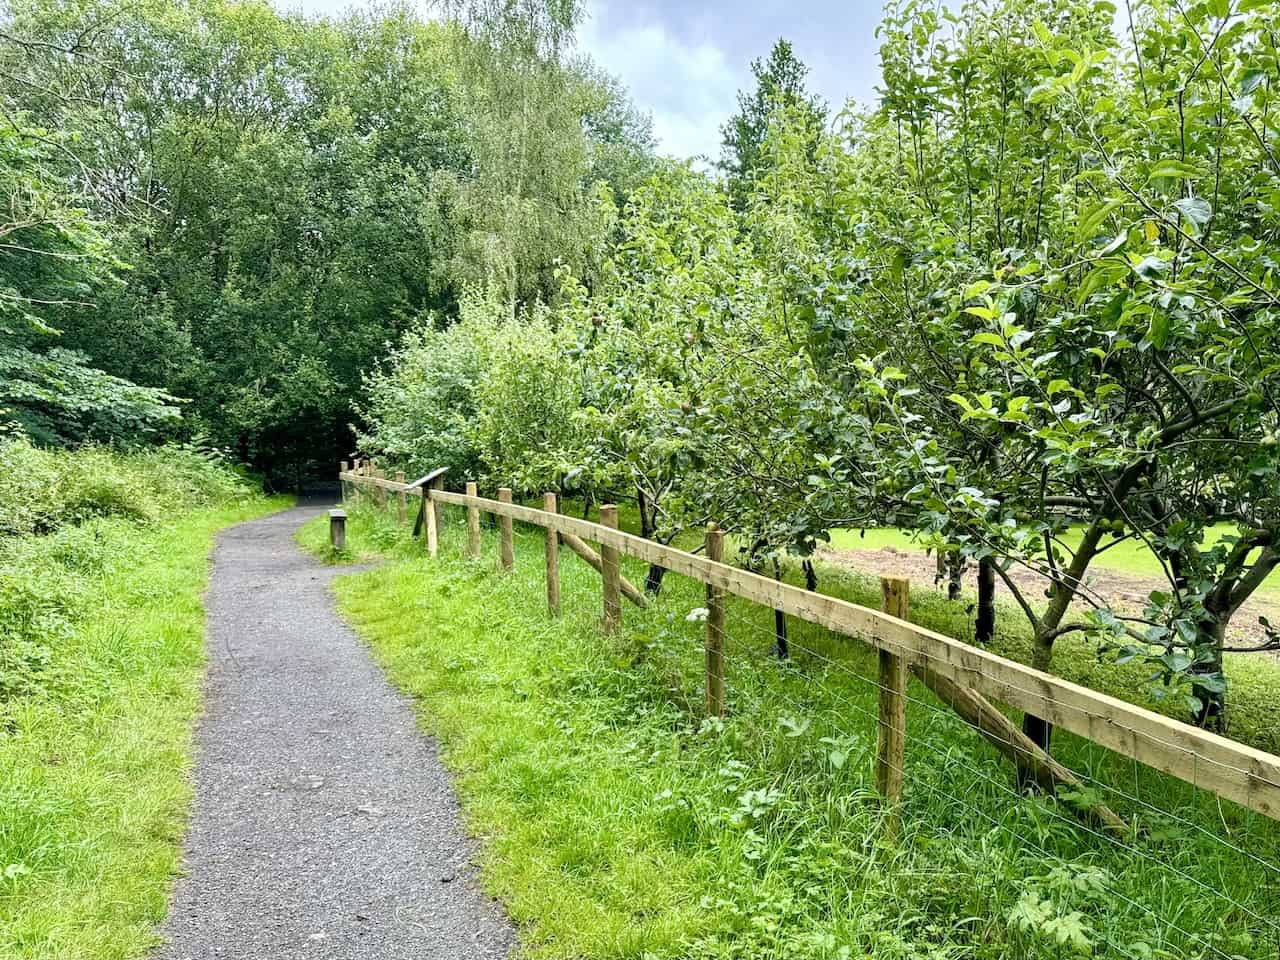 Beck Hole orchard by the side of the Rail Trail. The orchard, planted in 2009 to mark the bicentenary of Goathland Primary School, features 20 different varieties of heritage apple trees.